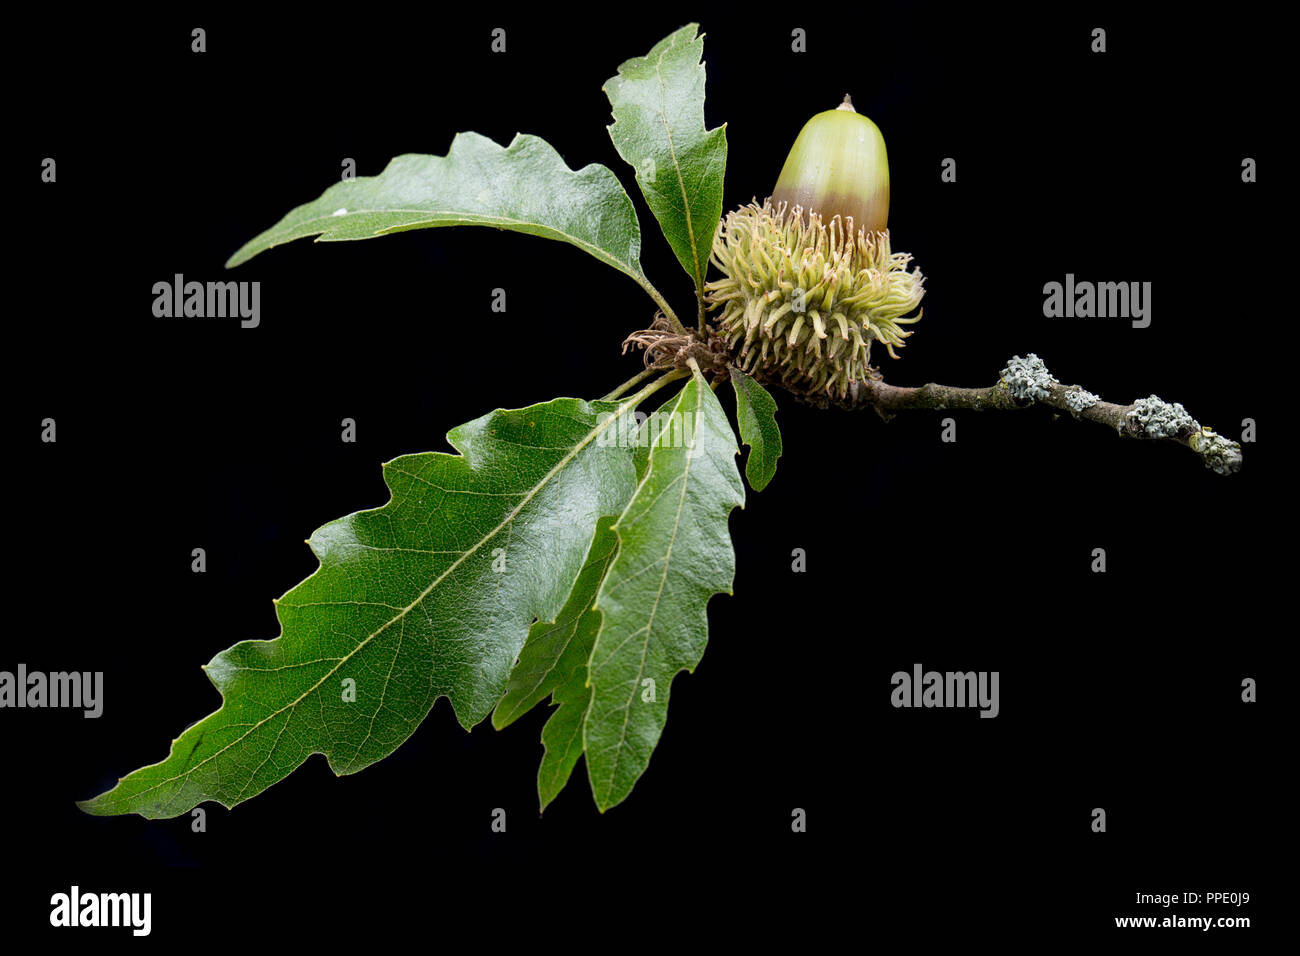 An acorn of the Turkey oak, Quercus cerris, photographed on a black background. The Turkey oak was introduced to the UK in the early 18th century comi Stock Photo